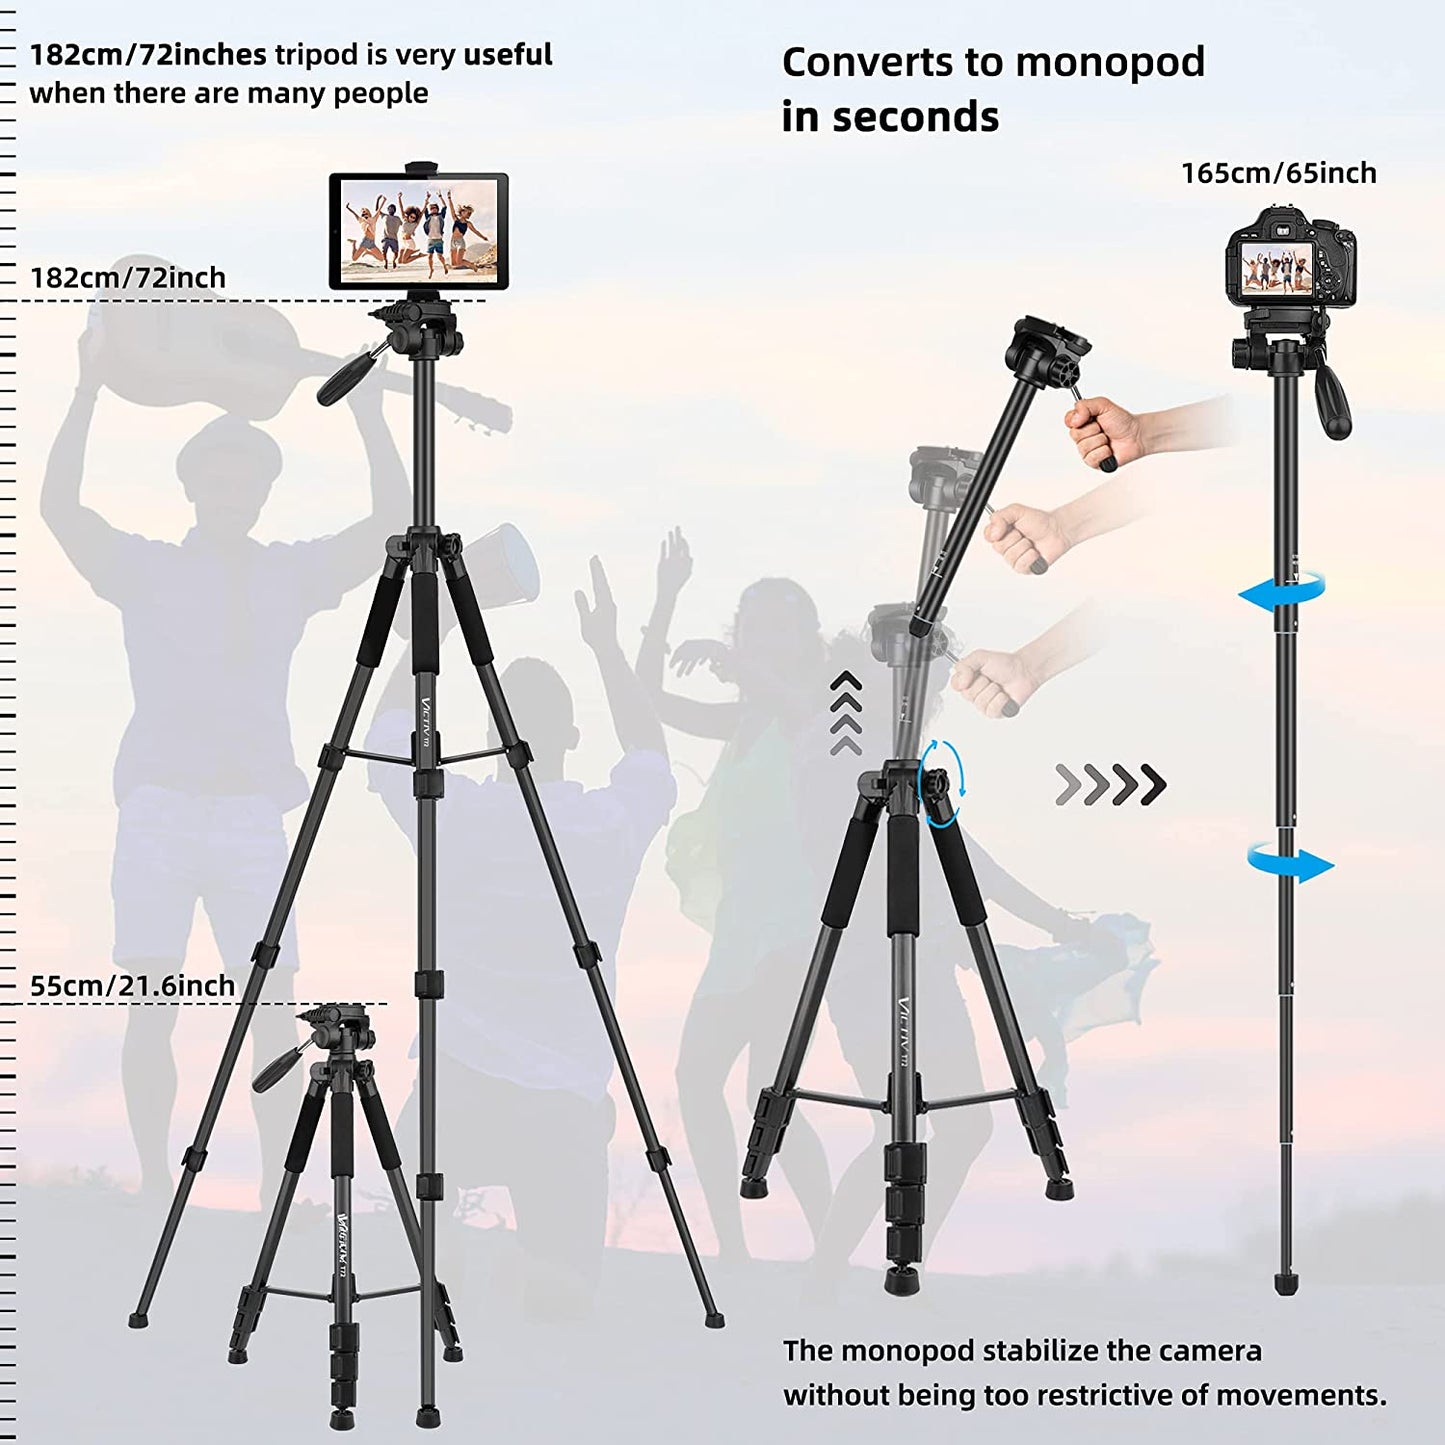 Victiv Camera & Tablet Tripod 72 inches, 2-in-1 Tripod Monopod 12 lbs Load for DSLR, Smartphone and iPAD with 2 Quick Mounts and Tablet Phone Holder for Travel and Work - Black